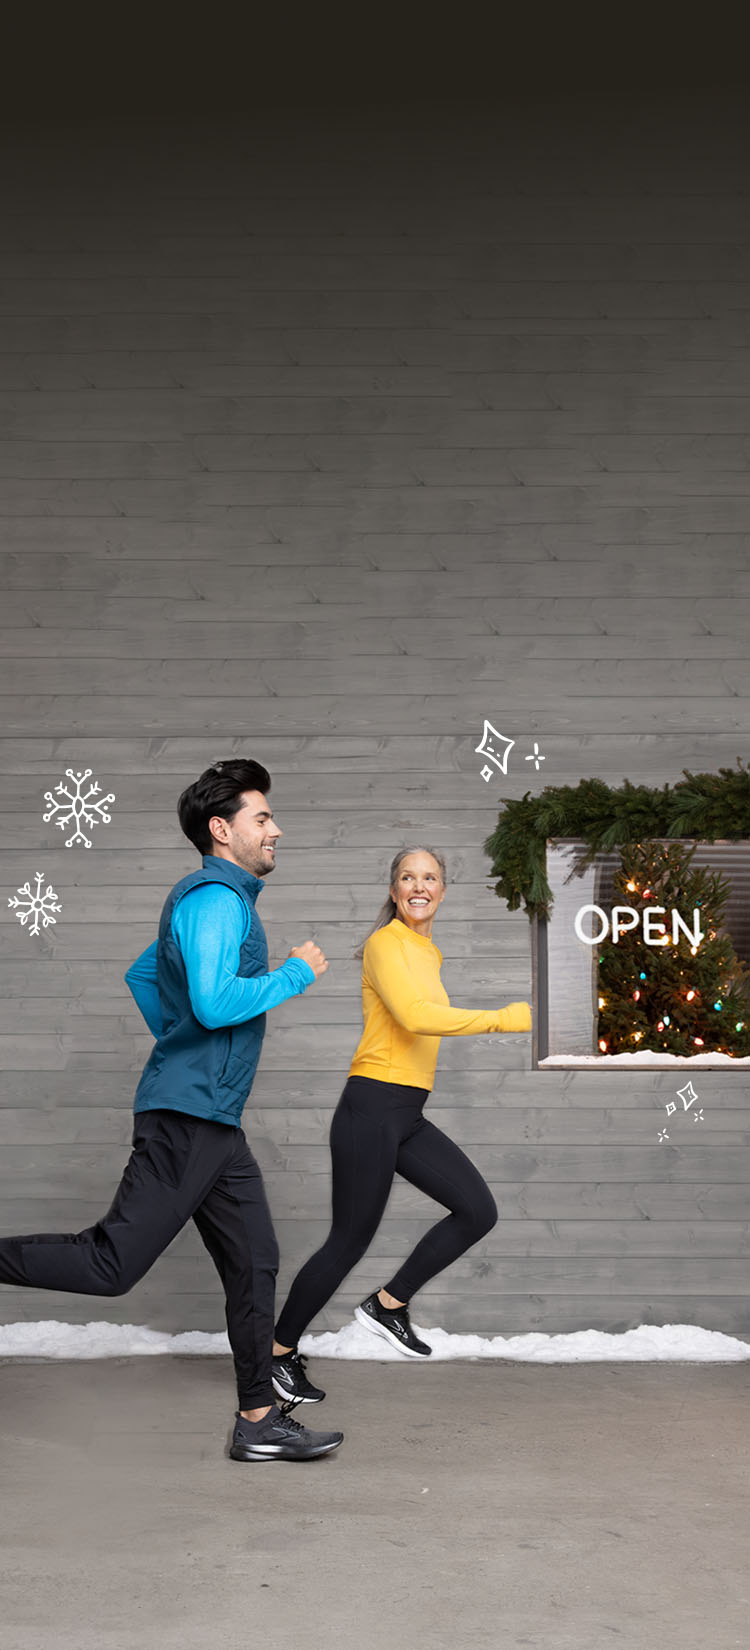 Man and woman running side by side with illustrations of snowflakes falling and a Christmas tree in the window behind them.